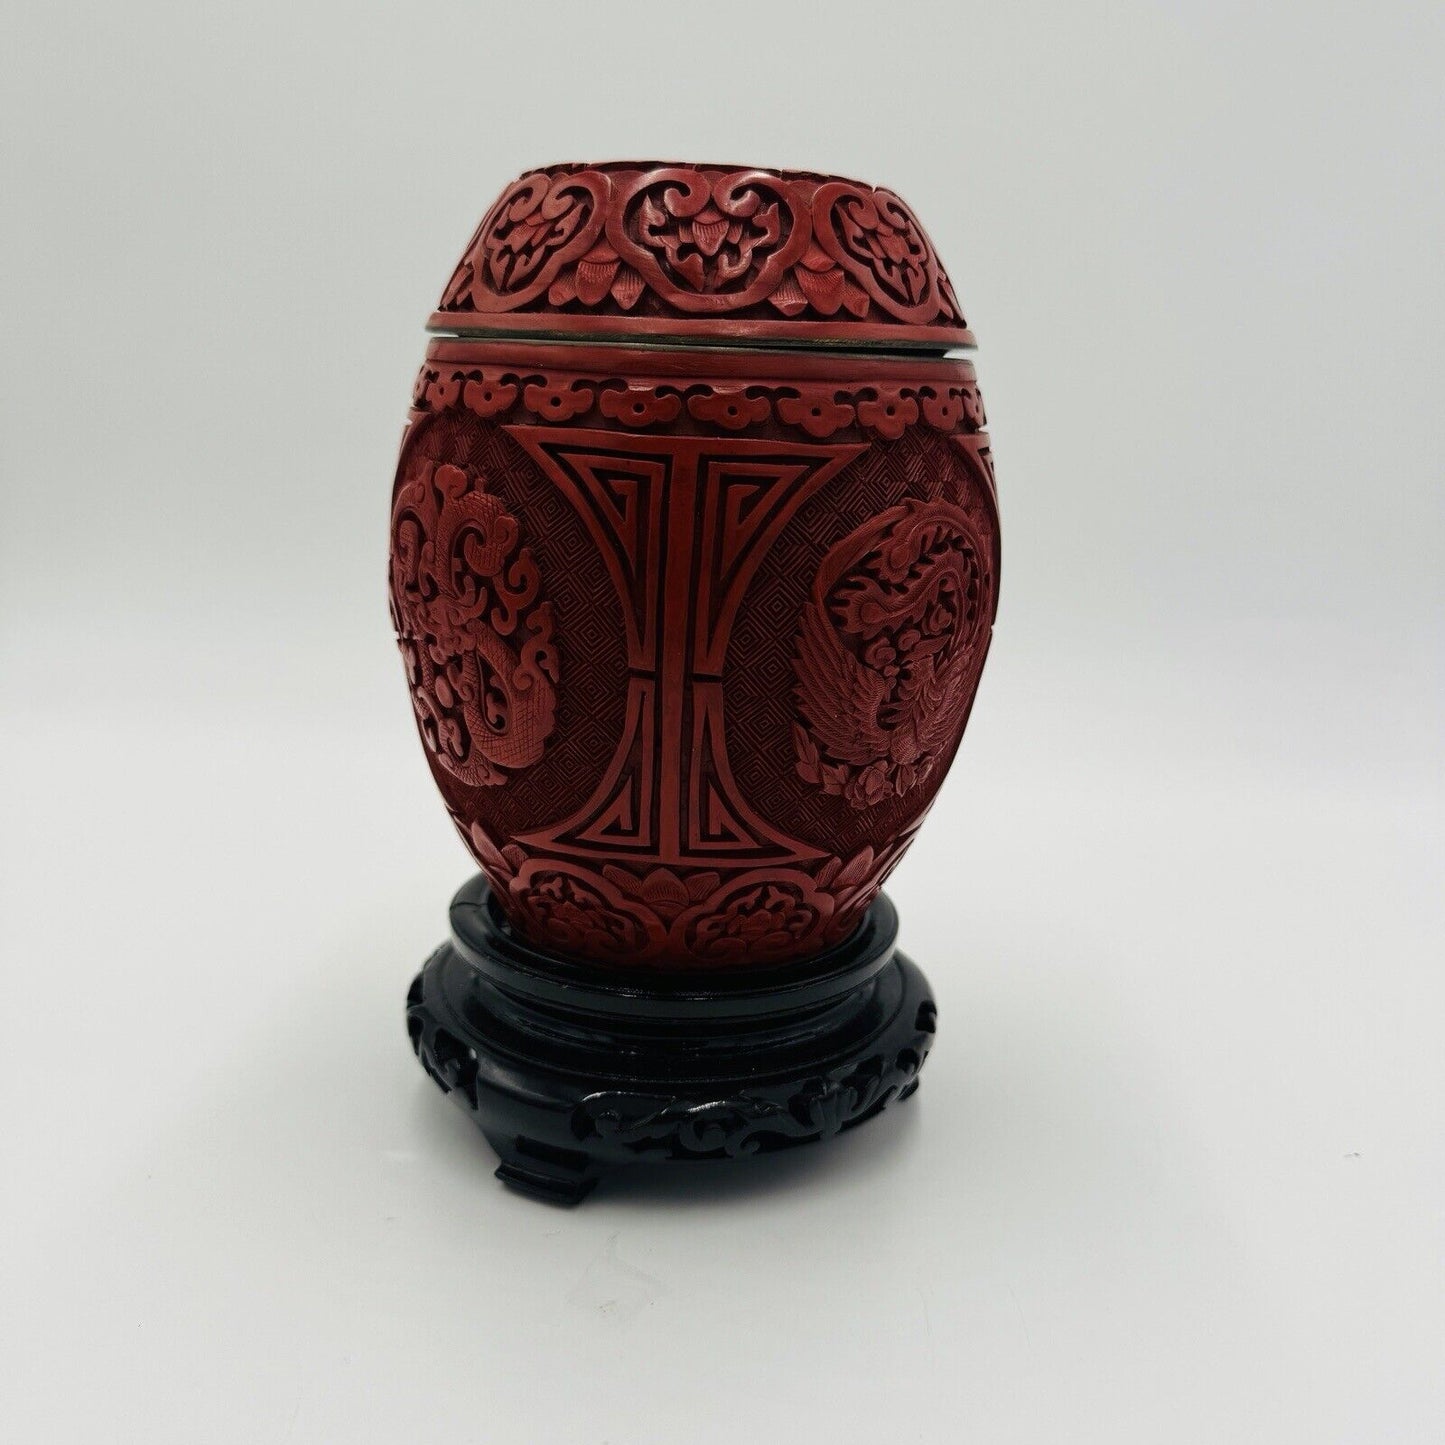 Chinese Cinnabar Red Lacquer & Brass Carved Lidded Urn Vase Enameled Blue 6.5"